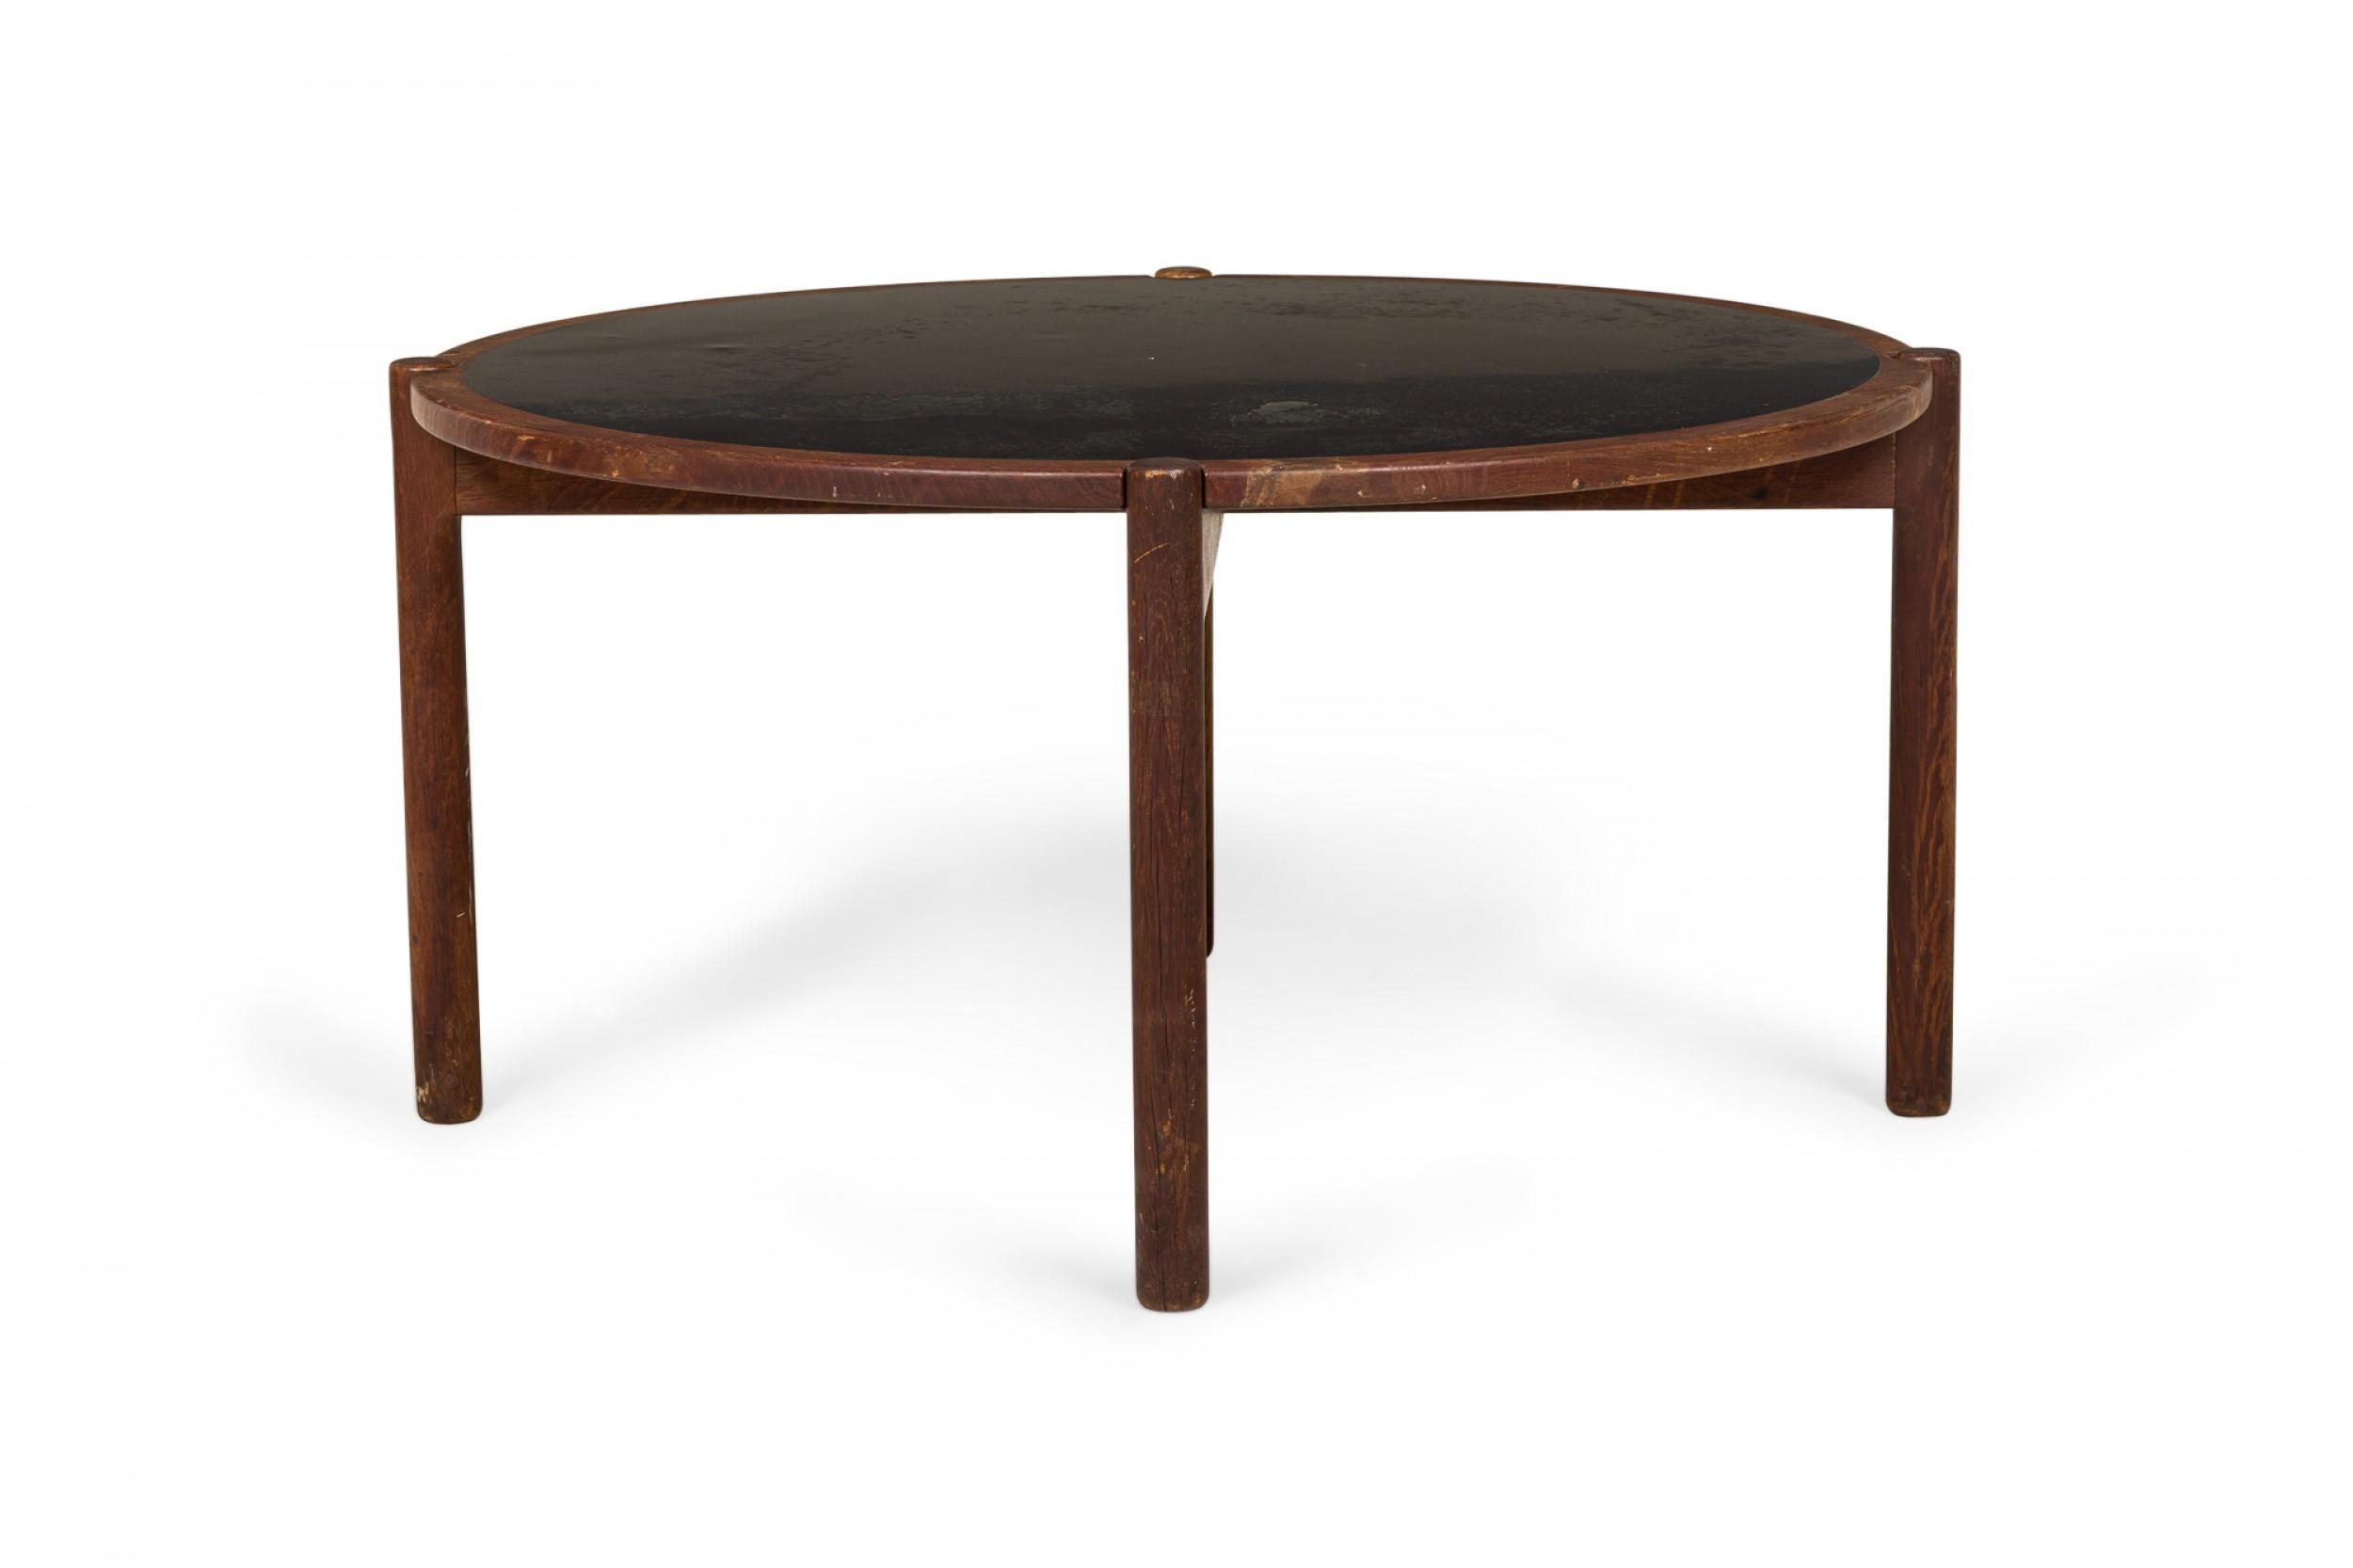 Danish mid-century coffee / cocktail table with a circular reversible top with a black laminate surface on one side and a solid teak surface on the reverse, resting on four round teak legs. (Hans Wegner / Johannes Hansen).